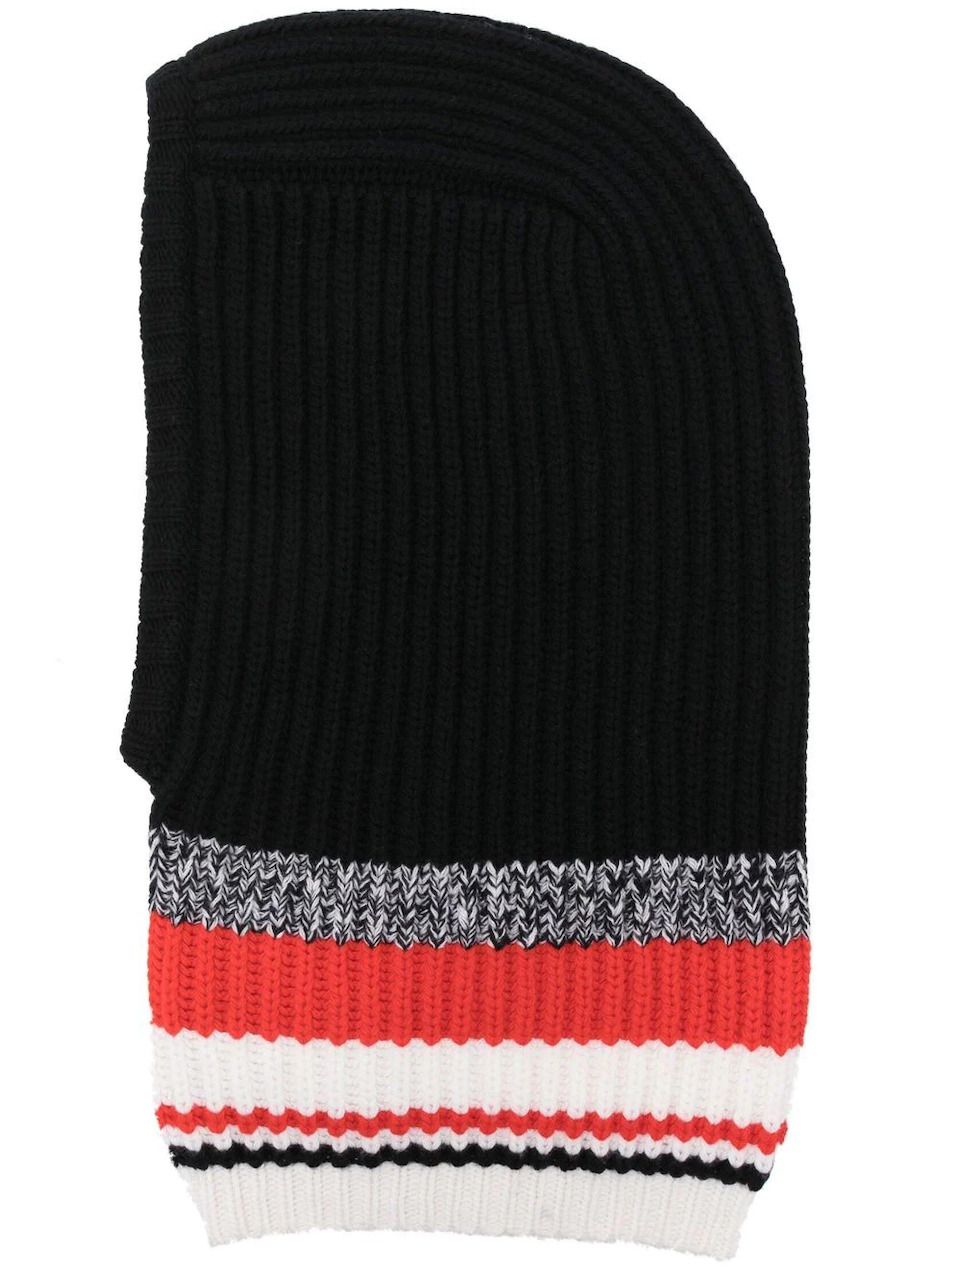 How to Style Balaclavas: Shop Our Favorites